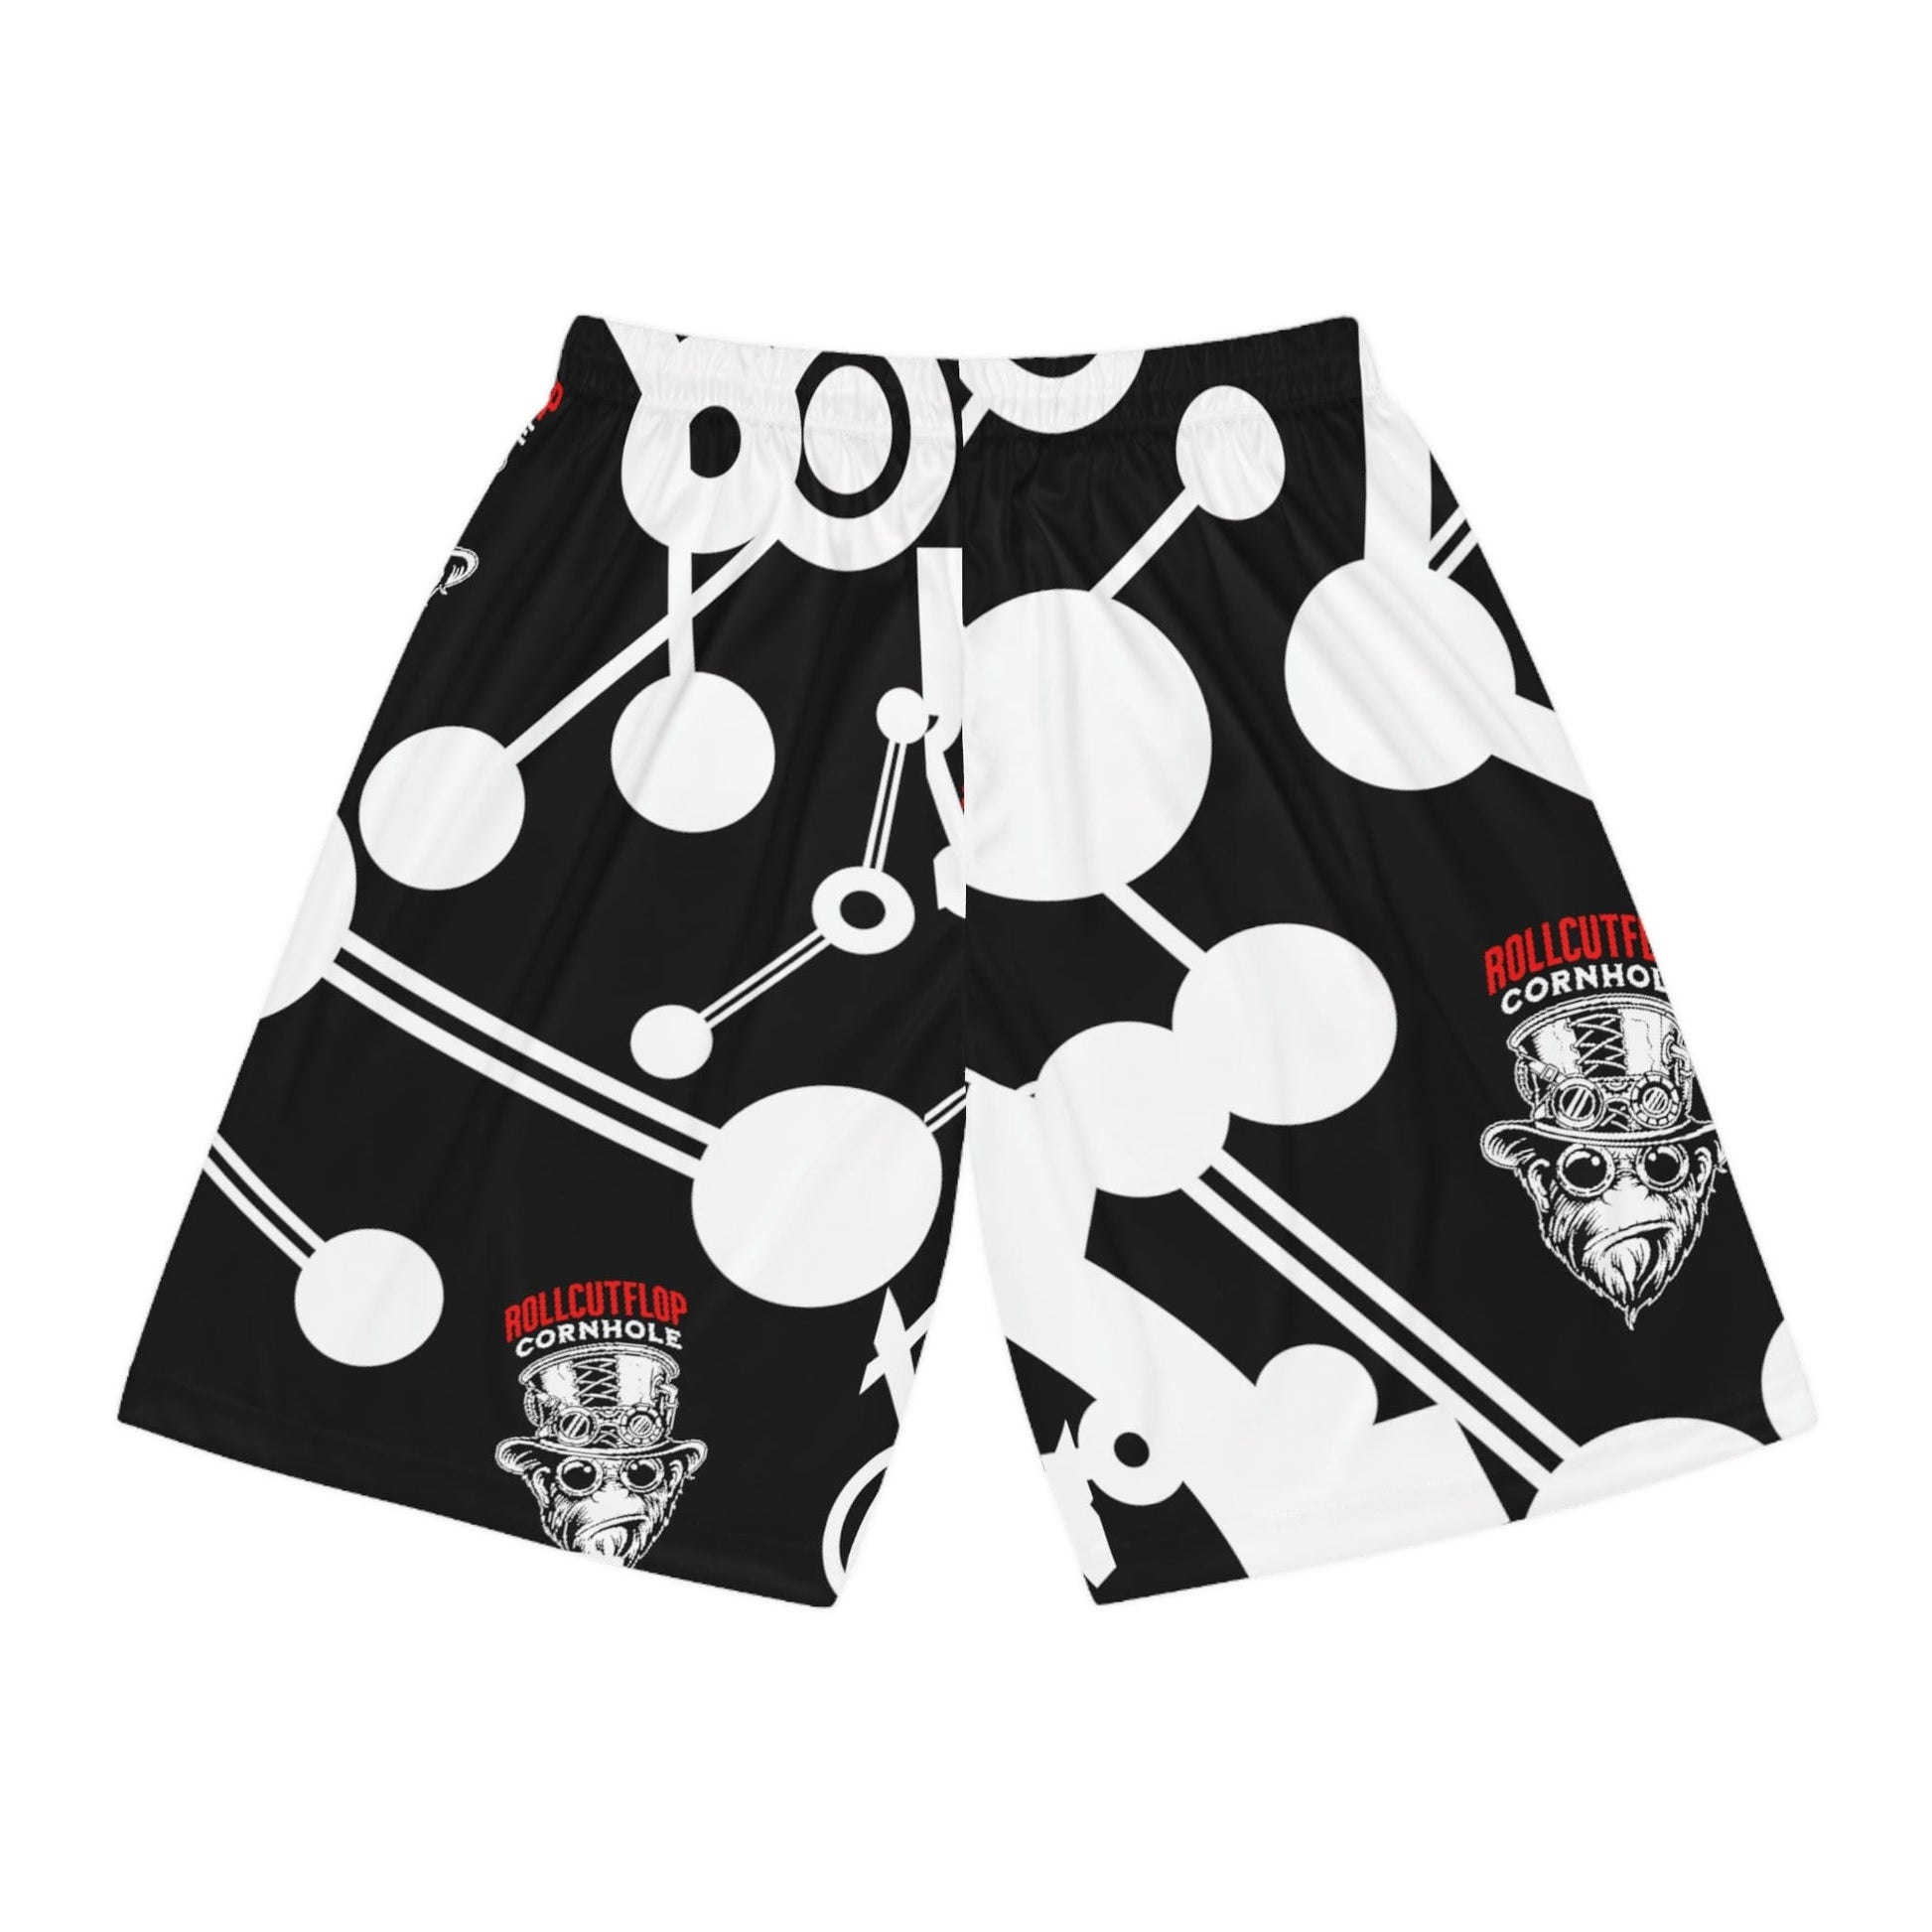 Roll Cut Flop™ All Over Print Black, Red & White Basketball Shorts - Steampunk Gorilla Logo with White Gear Print - Back view